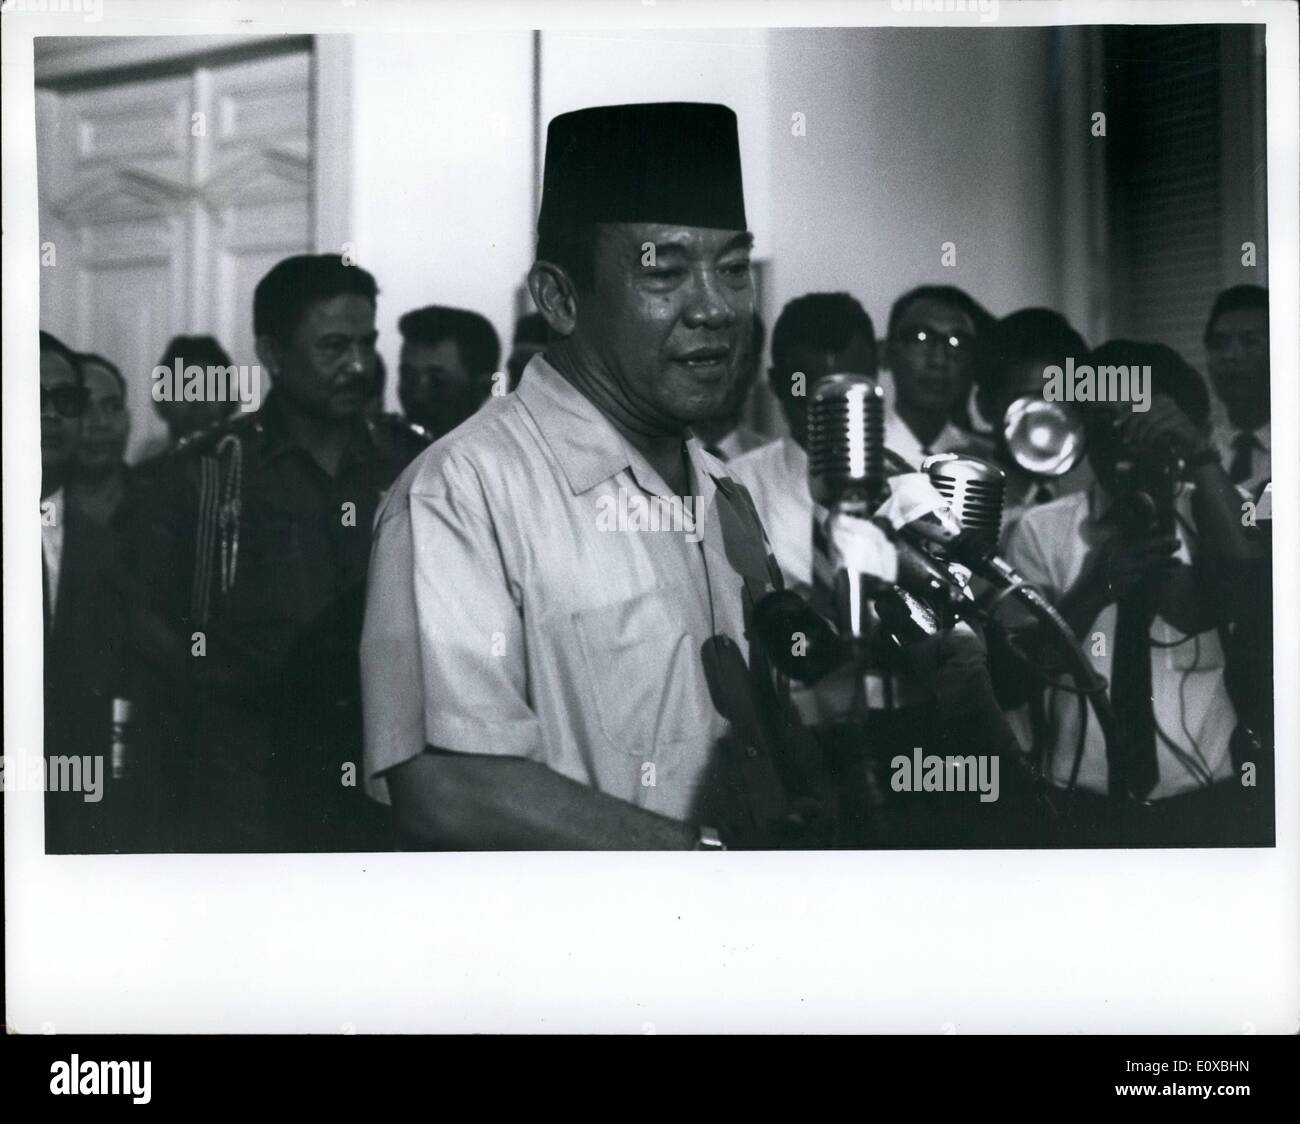 Mar. 03, 1966 - President Sukarno, at Istana Palace, Djakarta, Indonesia, Oct. 14, 1965 announces appointment of Maj Gen. Suharto as Army Chief f Staff. Suharto w replaces Lt. gen Achmad yani, who was killed by communists during aborted coup of Oct 1. Behind Sukarno - hiss chief bodyguard Brig. Gen Sabur. Sabur: Sukarno's chief of bodyguard ousted by Suharto (Sabur: behind Sukarno) ousted and arrested by Suharto.03 Stock Photo